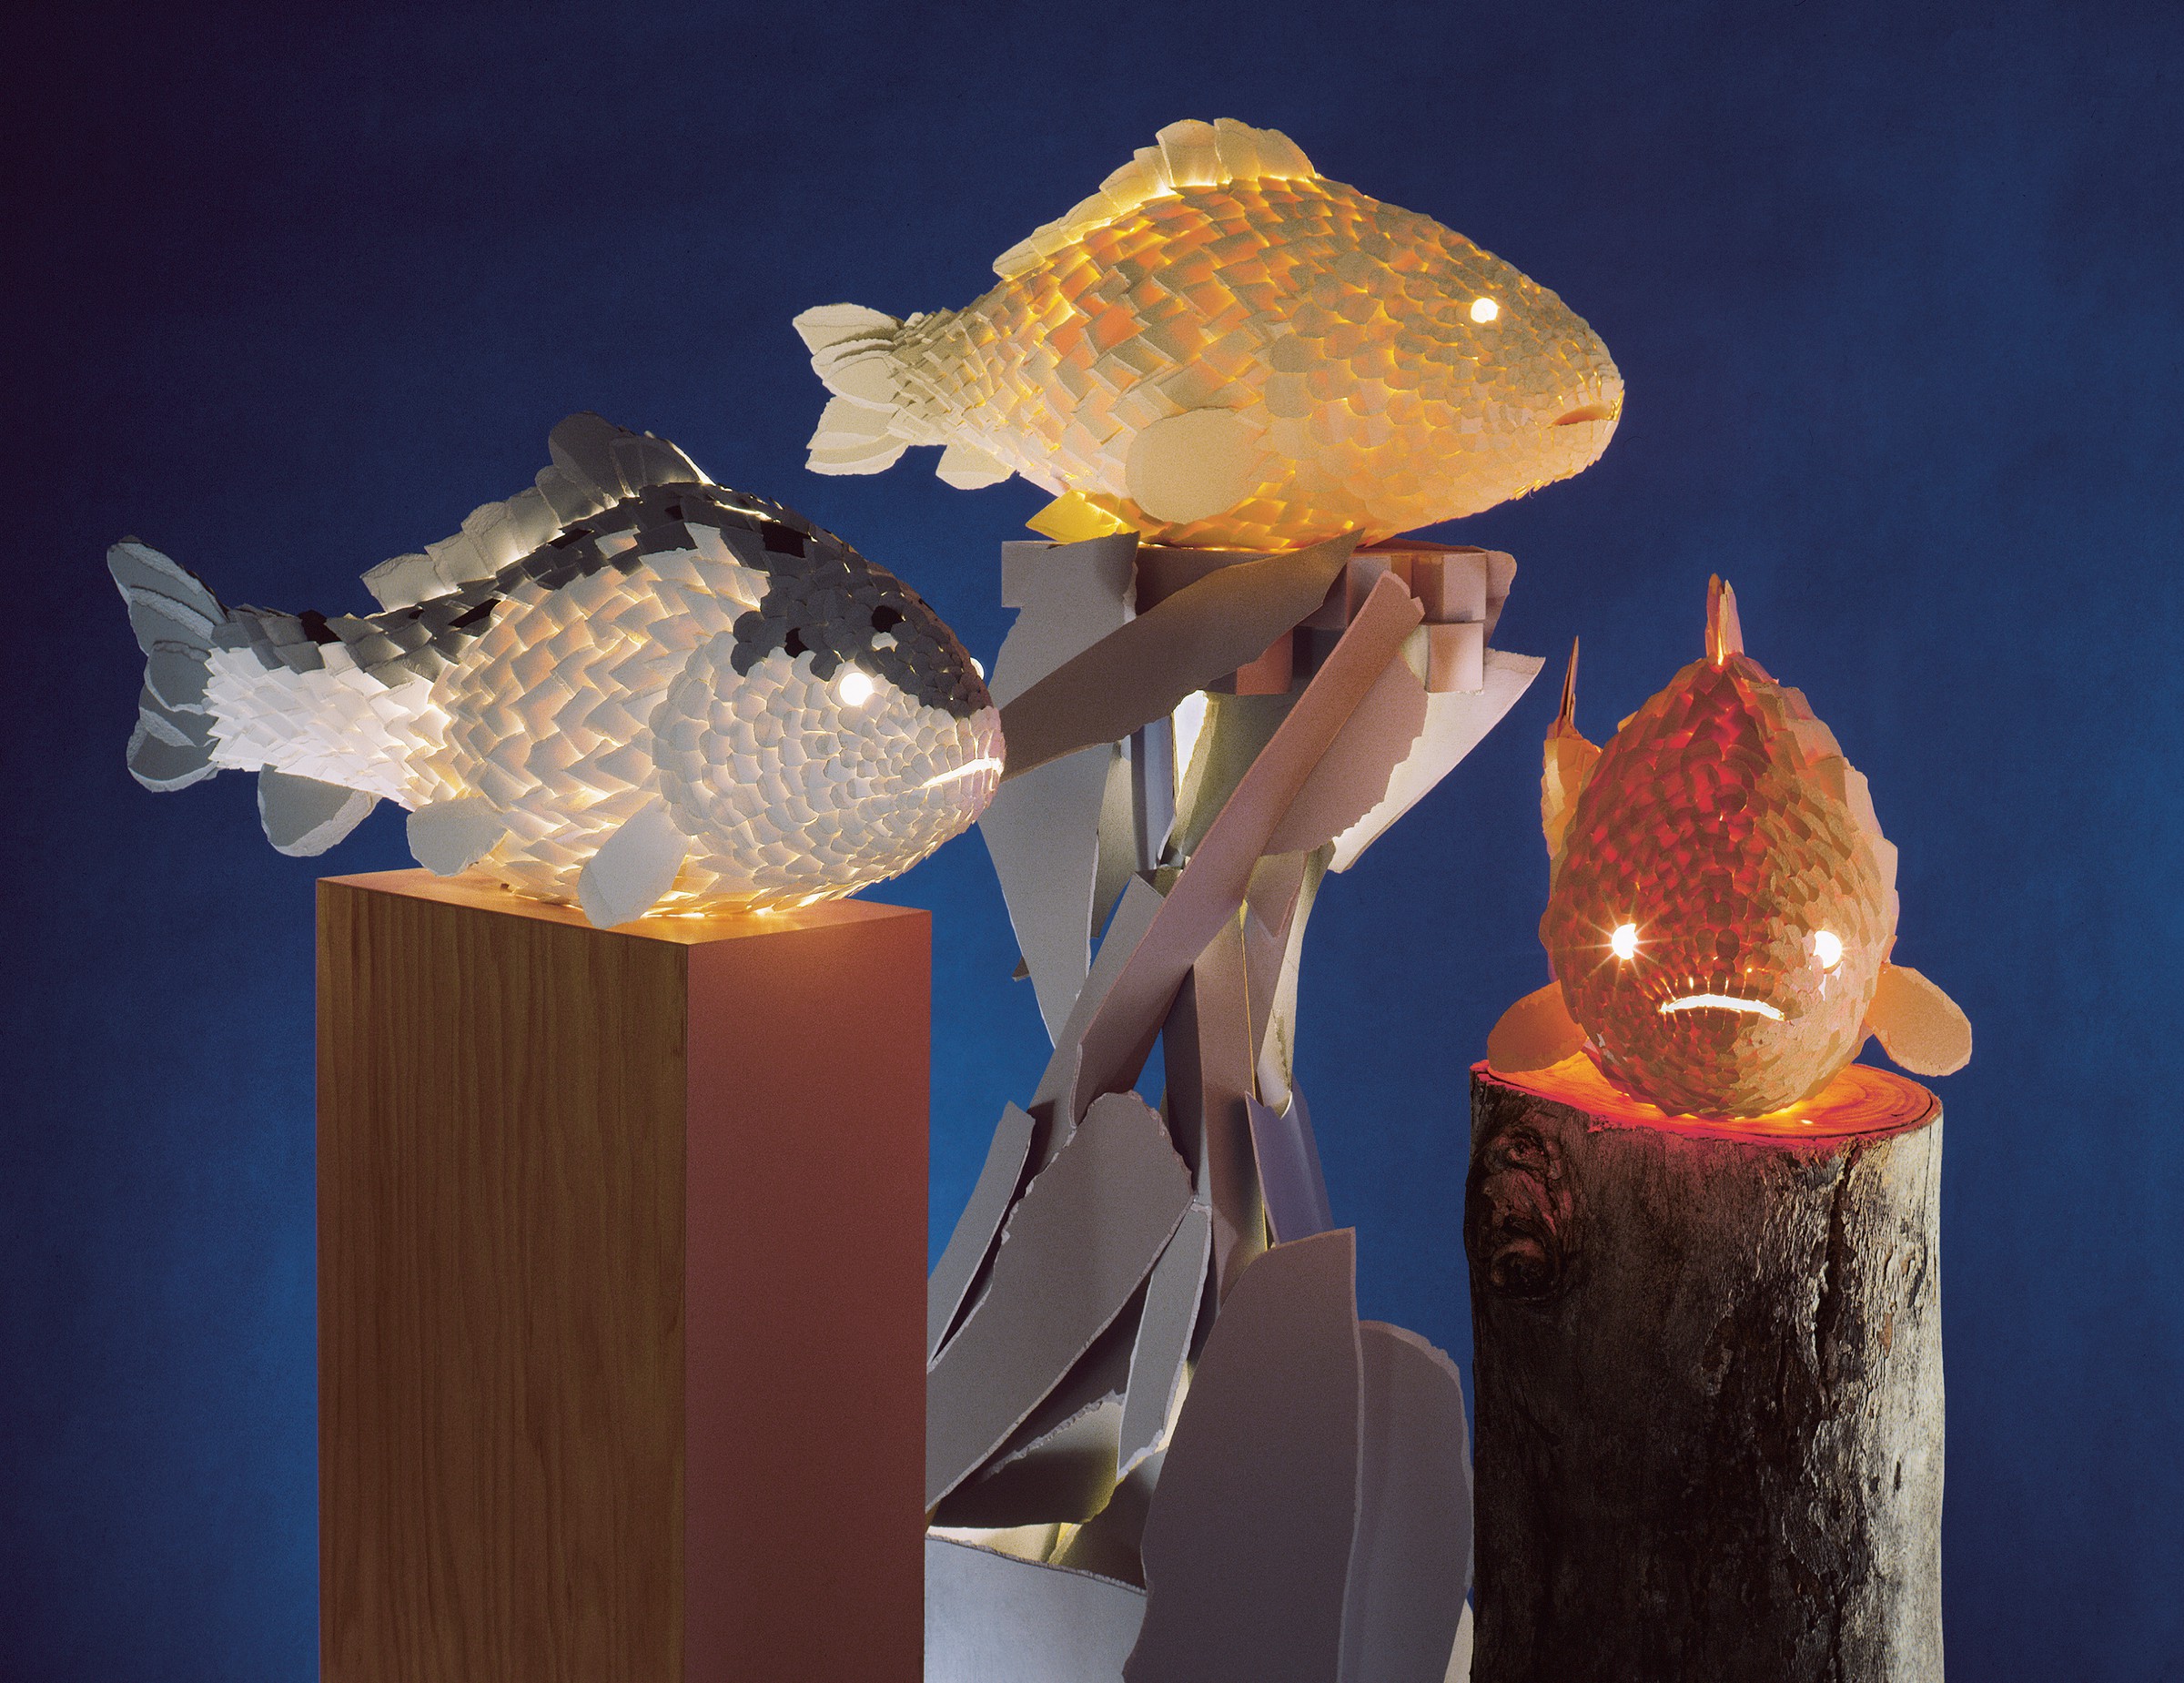 Fish Lamps by Frank Gehry